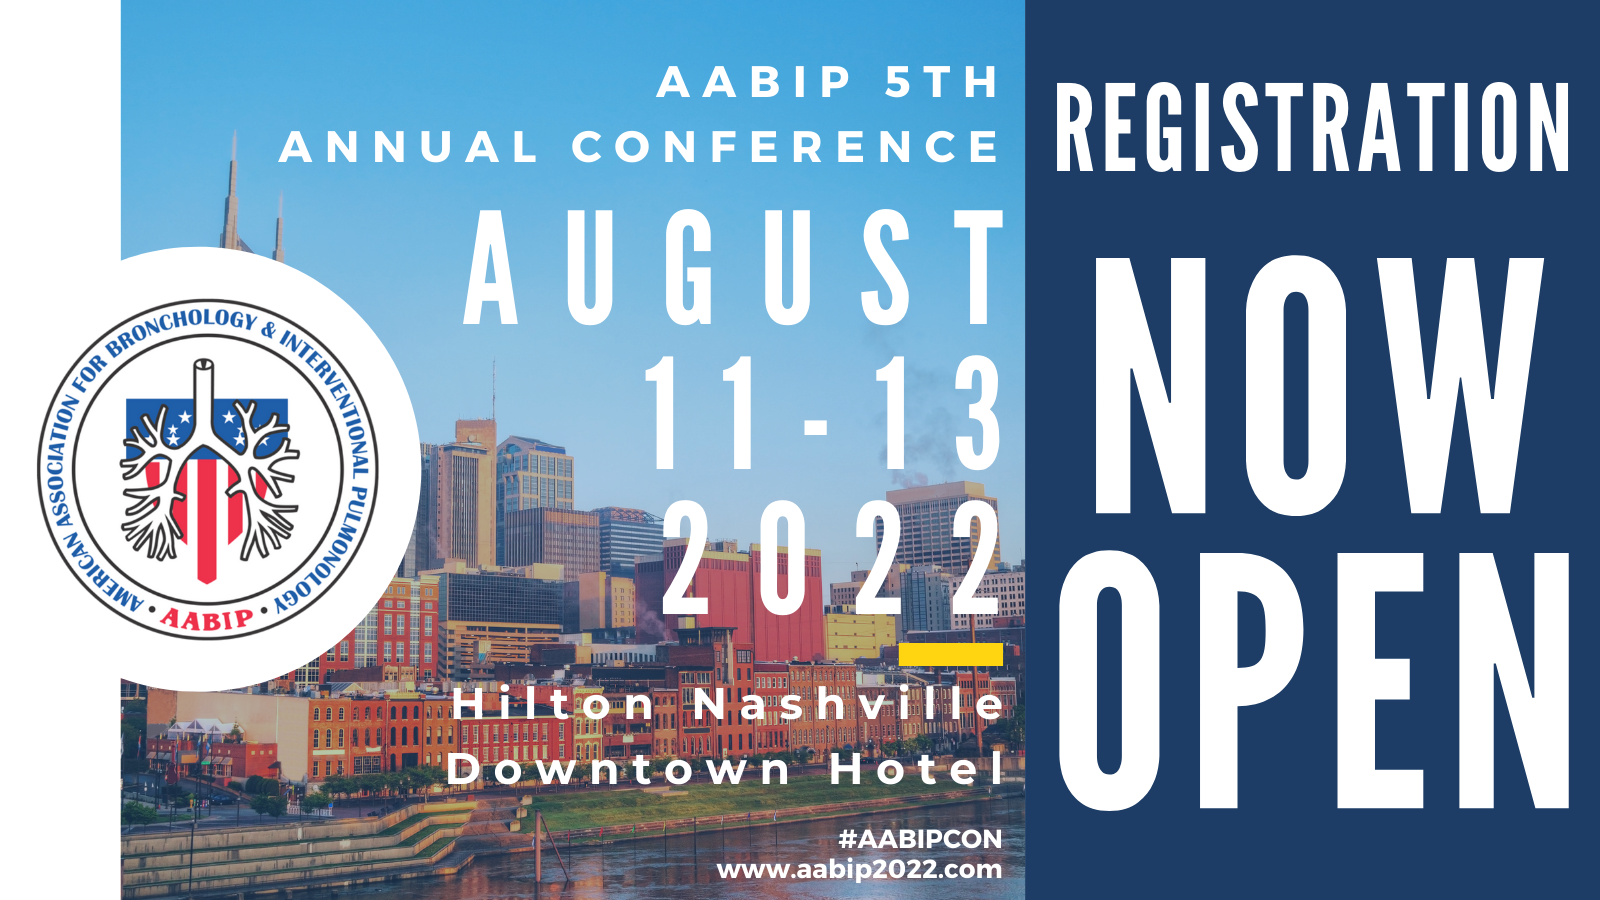 2022 conference registration now open